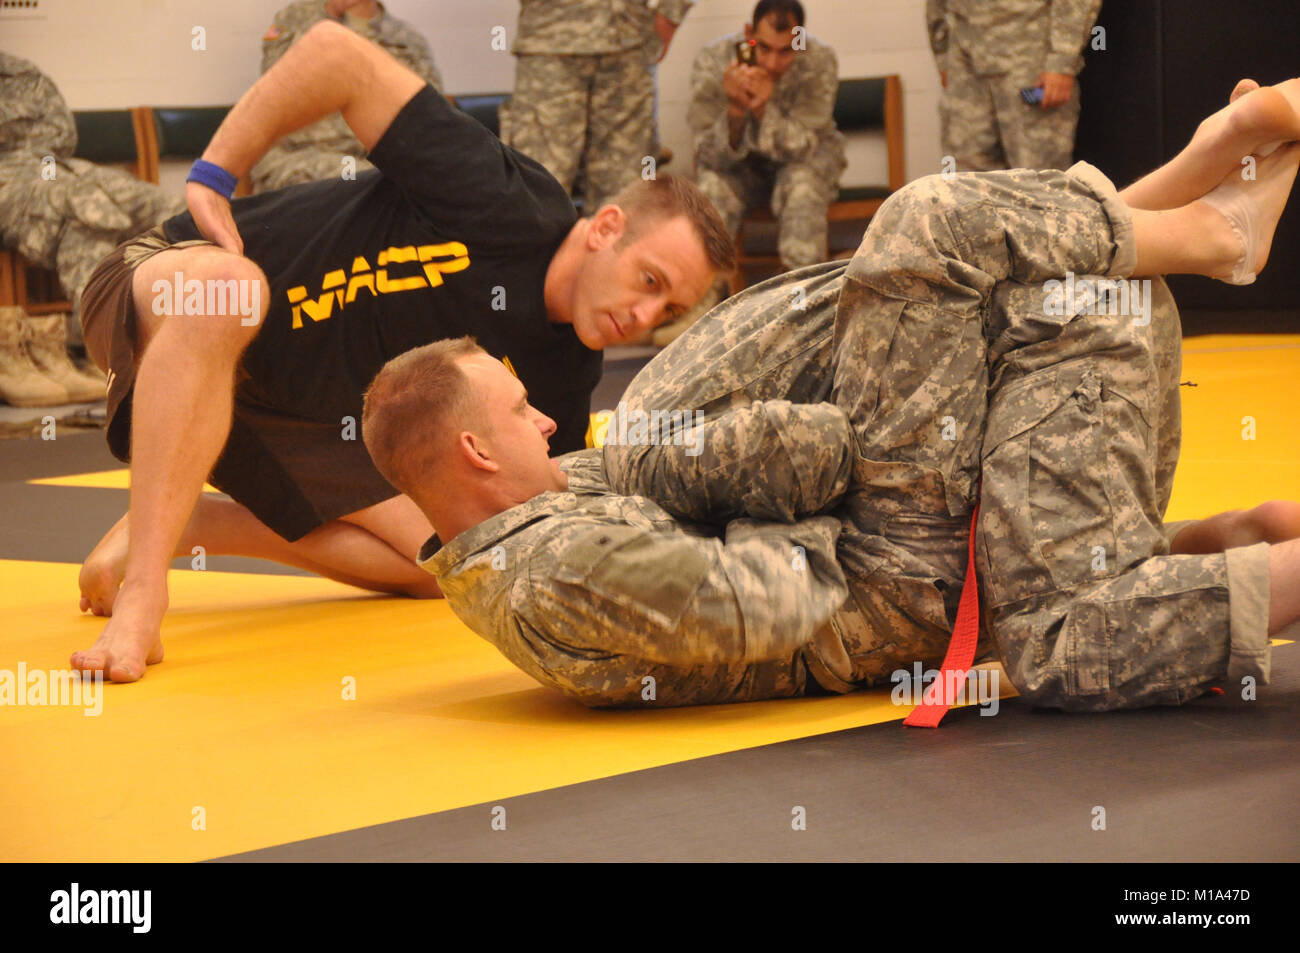 110916-Z-DH635-003 Sgt. Ryan Williams of Yucaipa, Calif., a military police officer with the 40th Military Police Company, 185th Military Police Battalion, 49th Military Police Brigade, attempts to choke out his opponent during the combatives tournament held as part of the Best Warrior Competition at Camp San Luis Obispo, Calif., Sept. 16, 2011. (Army National Guard photo/ Sgt. Salli Curchin) Stock Photo